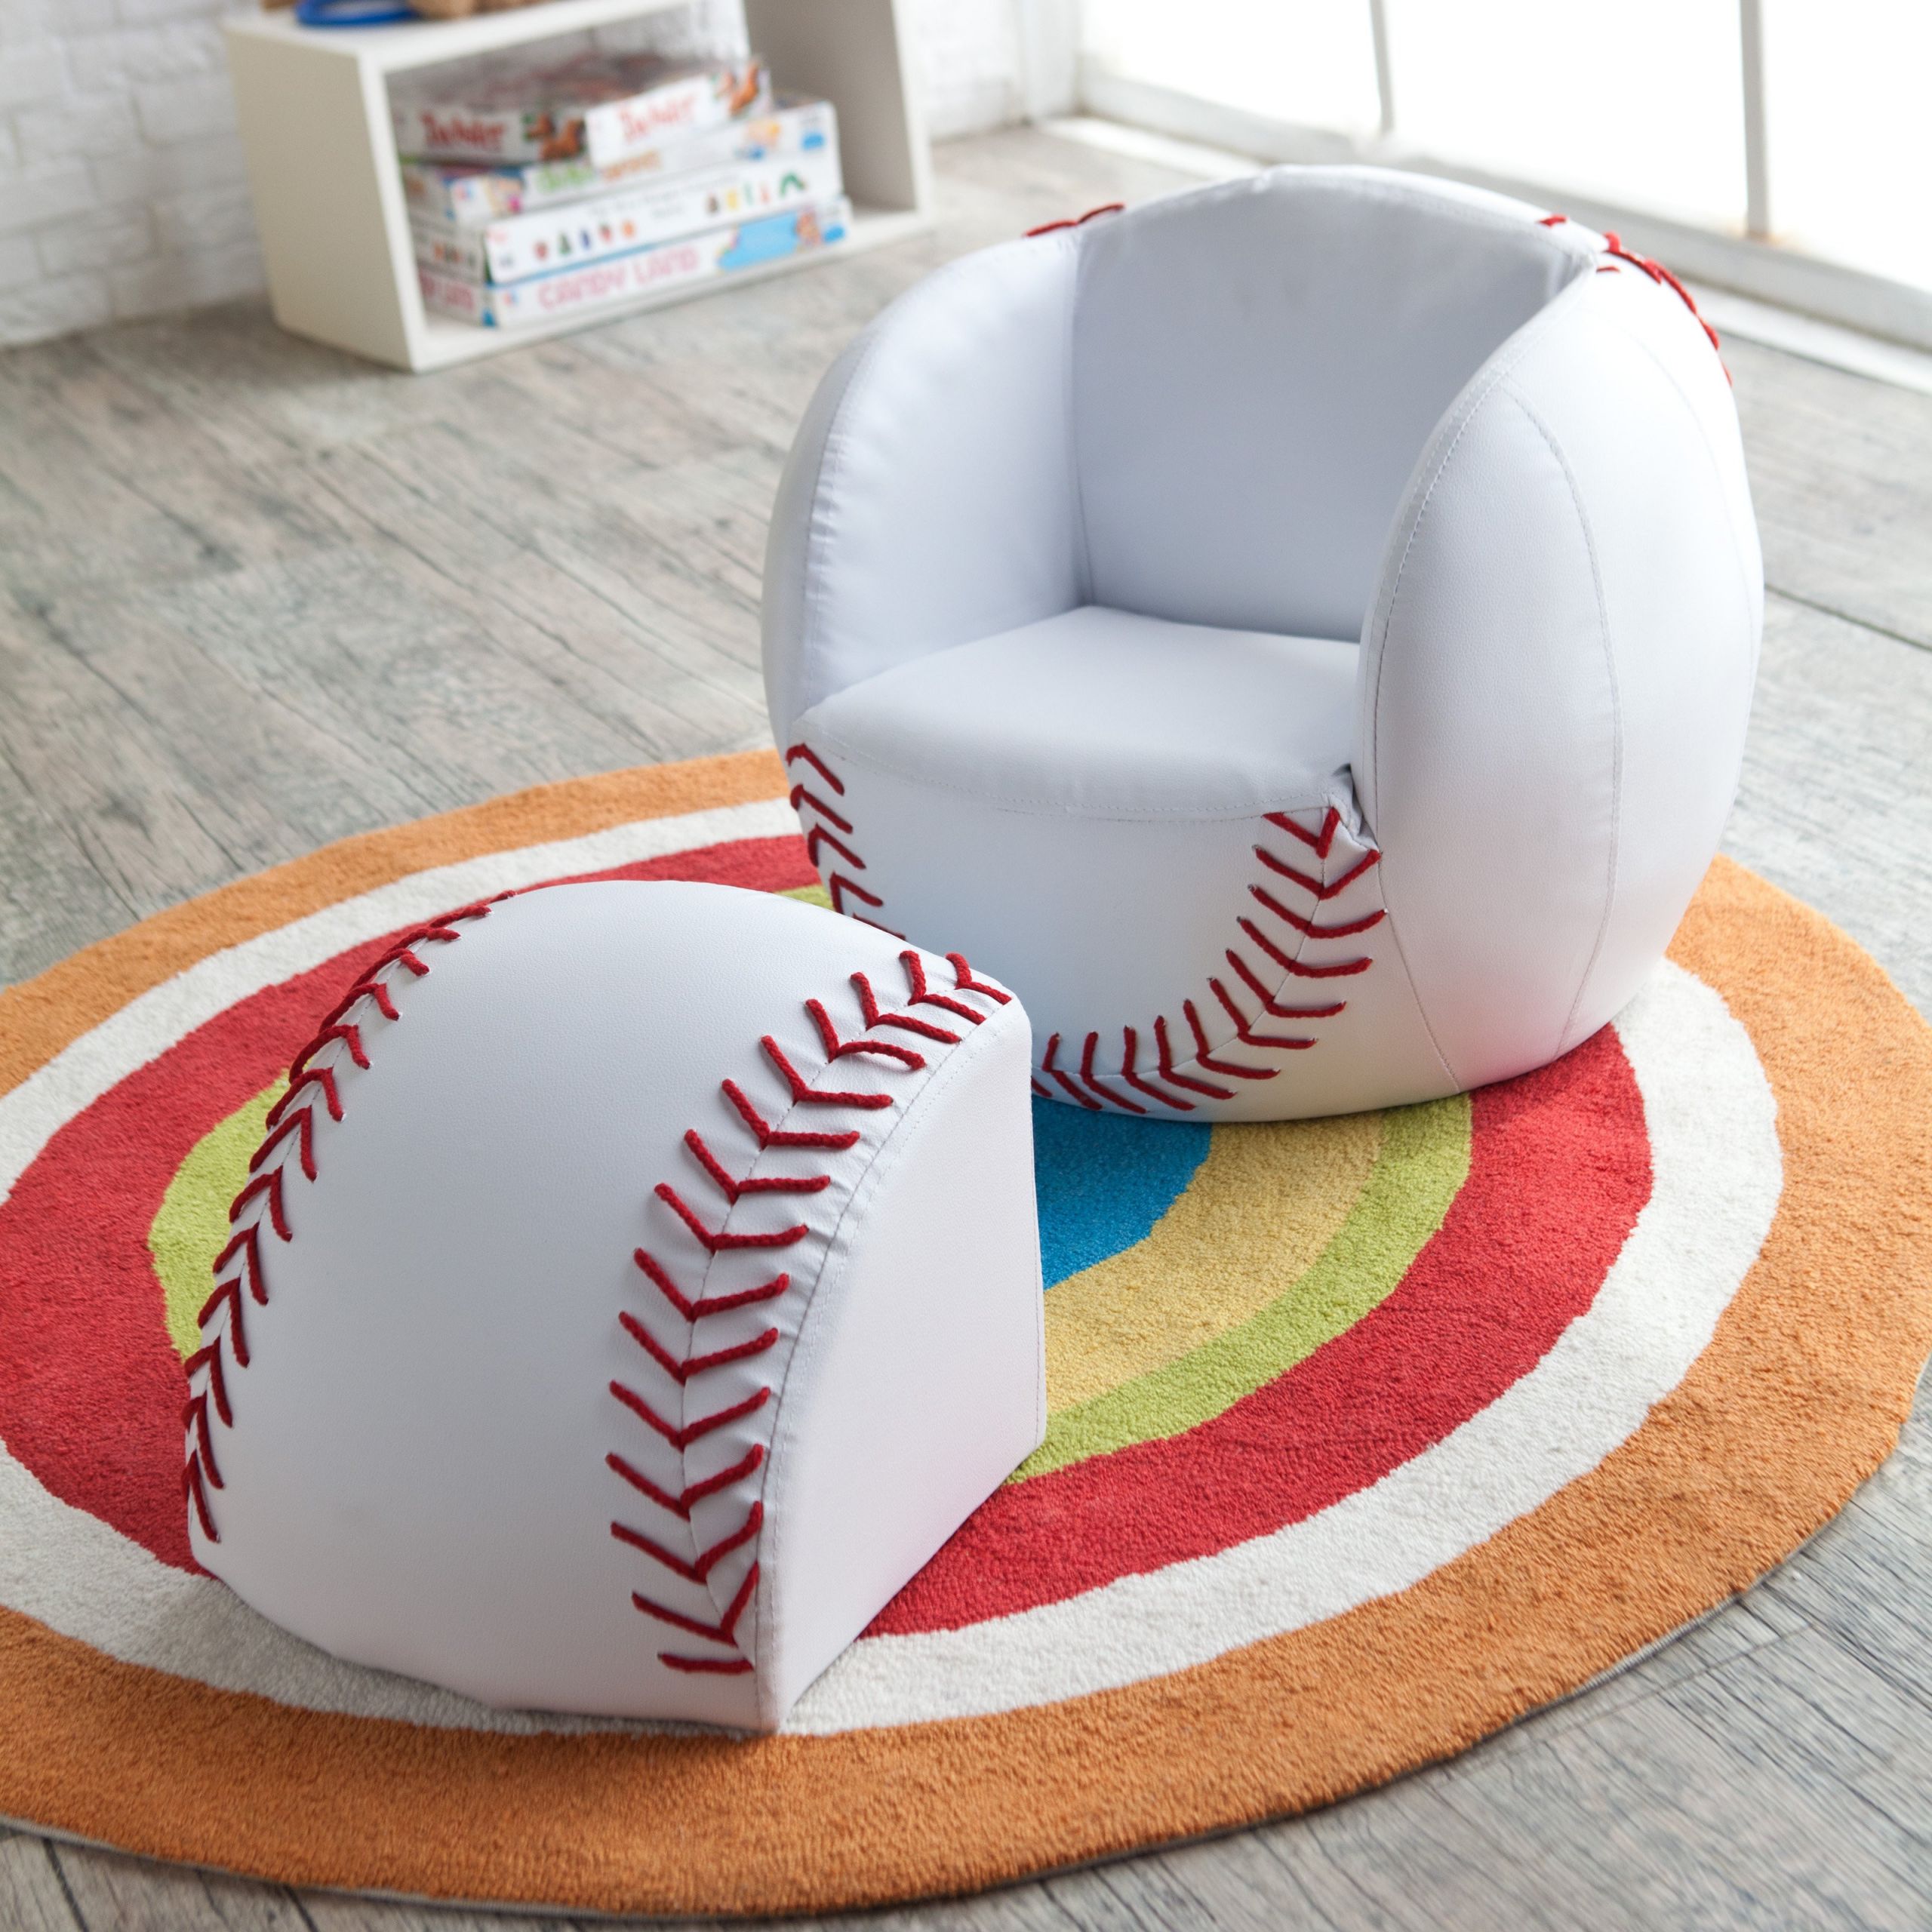 Kids Chair With Ottoman
 Kids Baseball Sports Chair With Ottoman at Hayneedle